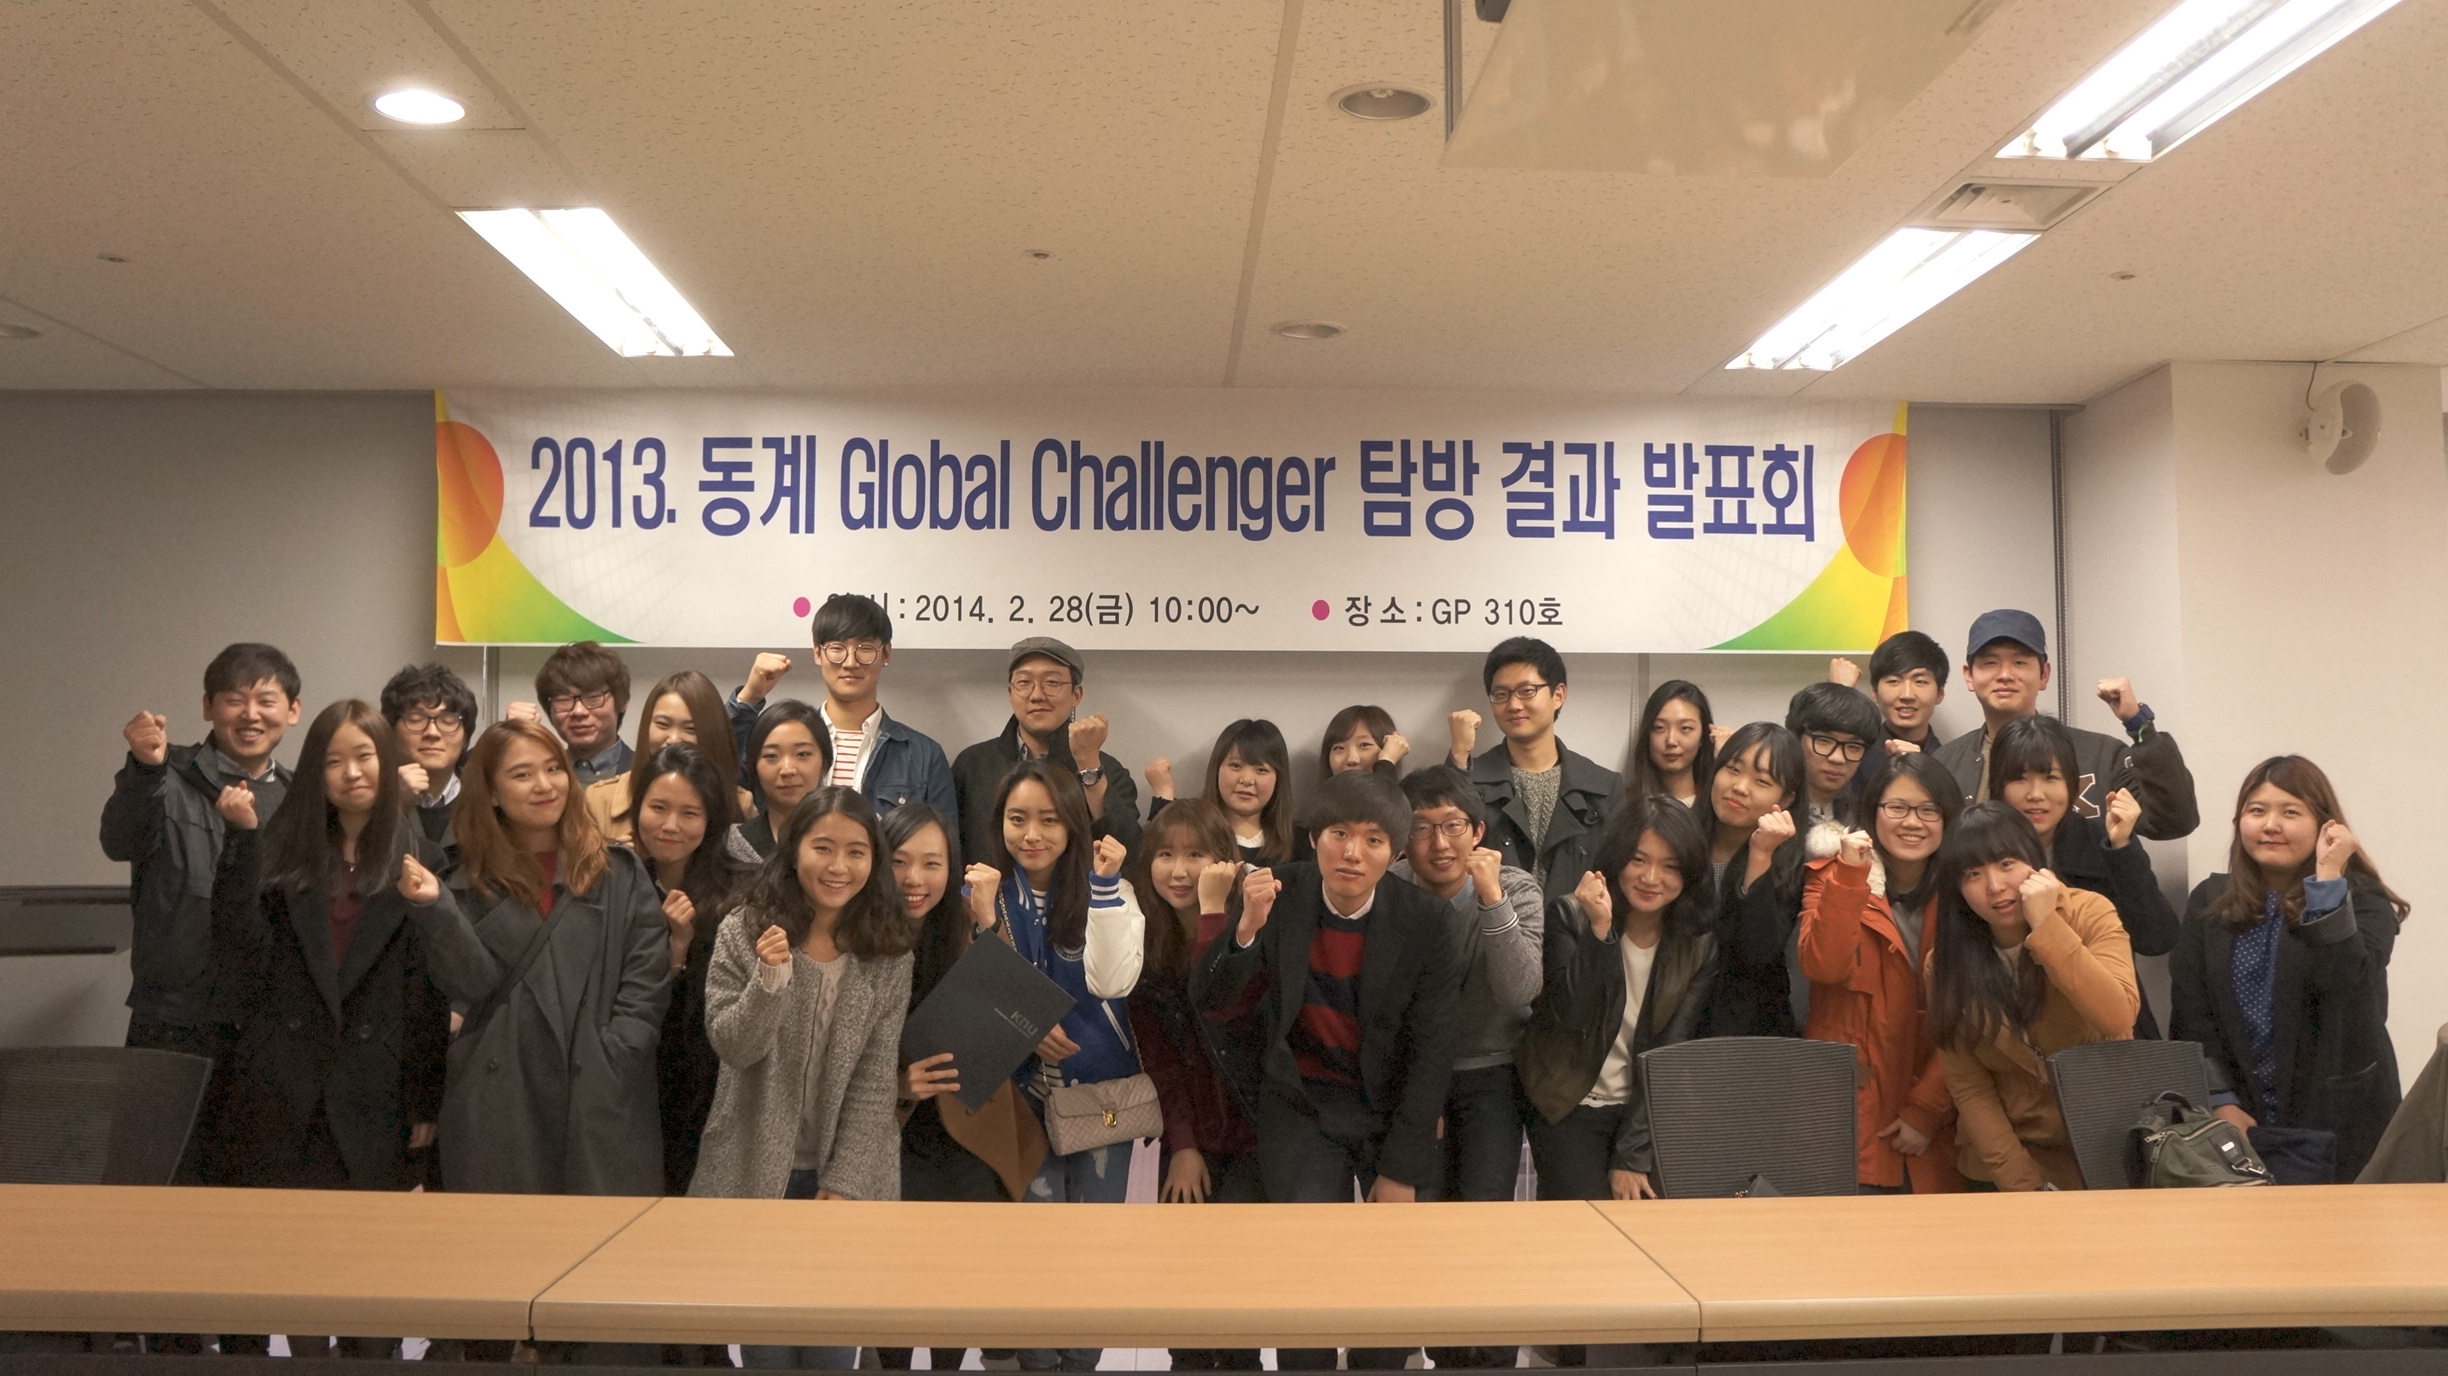 Result presentation of 2013 winter global challengers 관련 이미지입니다